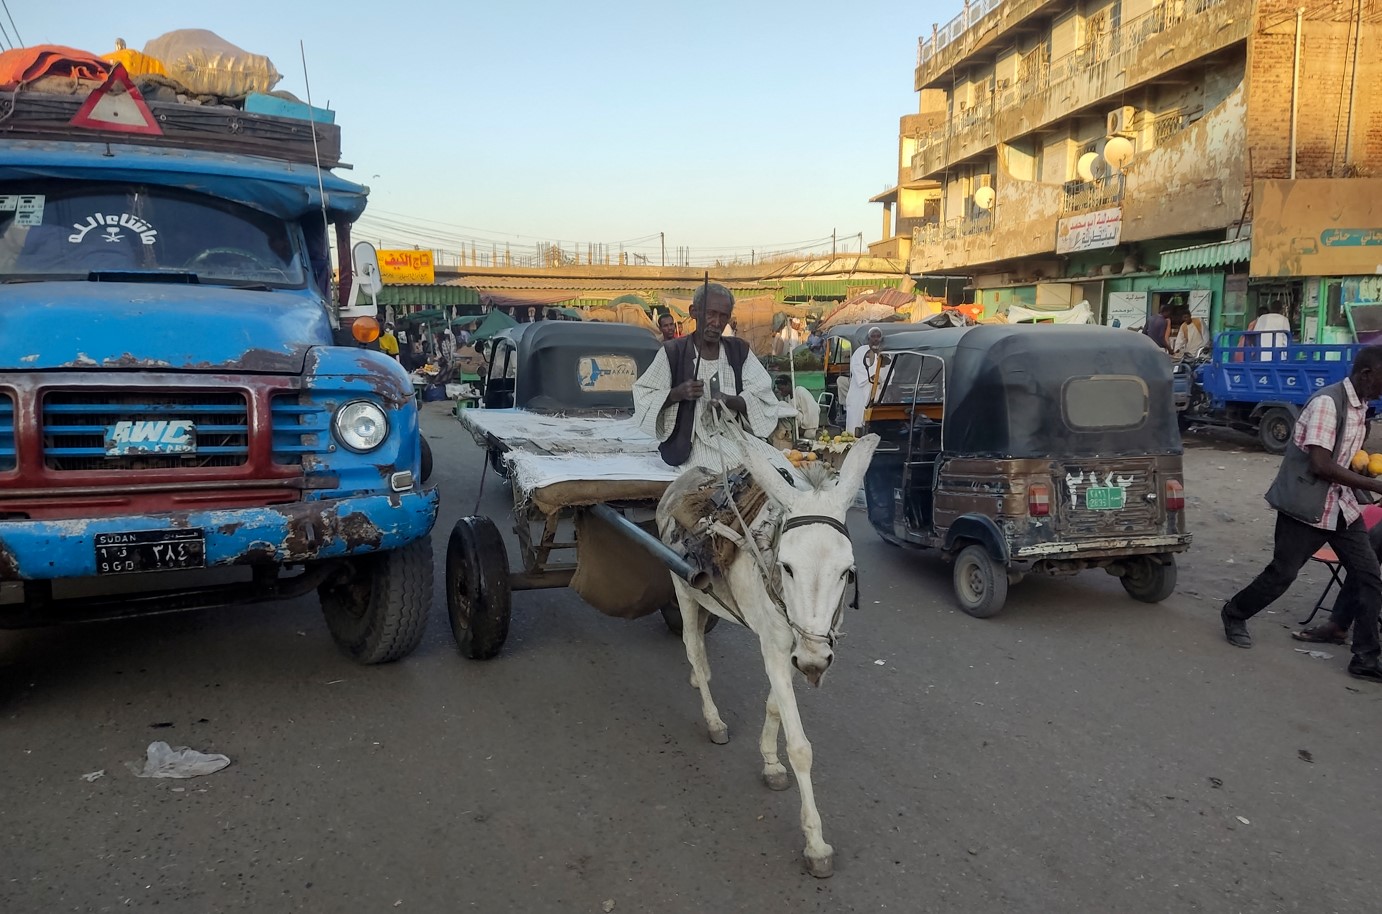 Facing fuel shortages, war-weary Sudanese turn to donkey carts